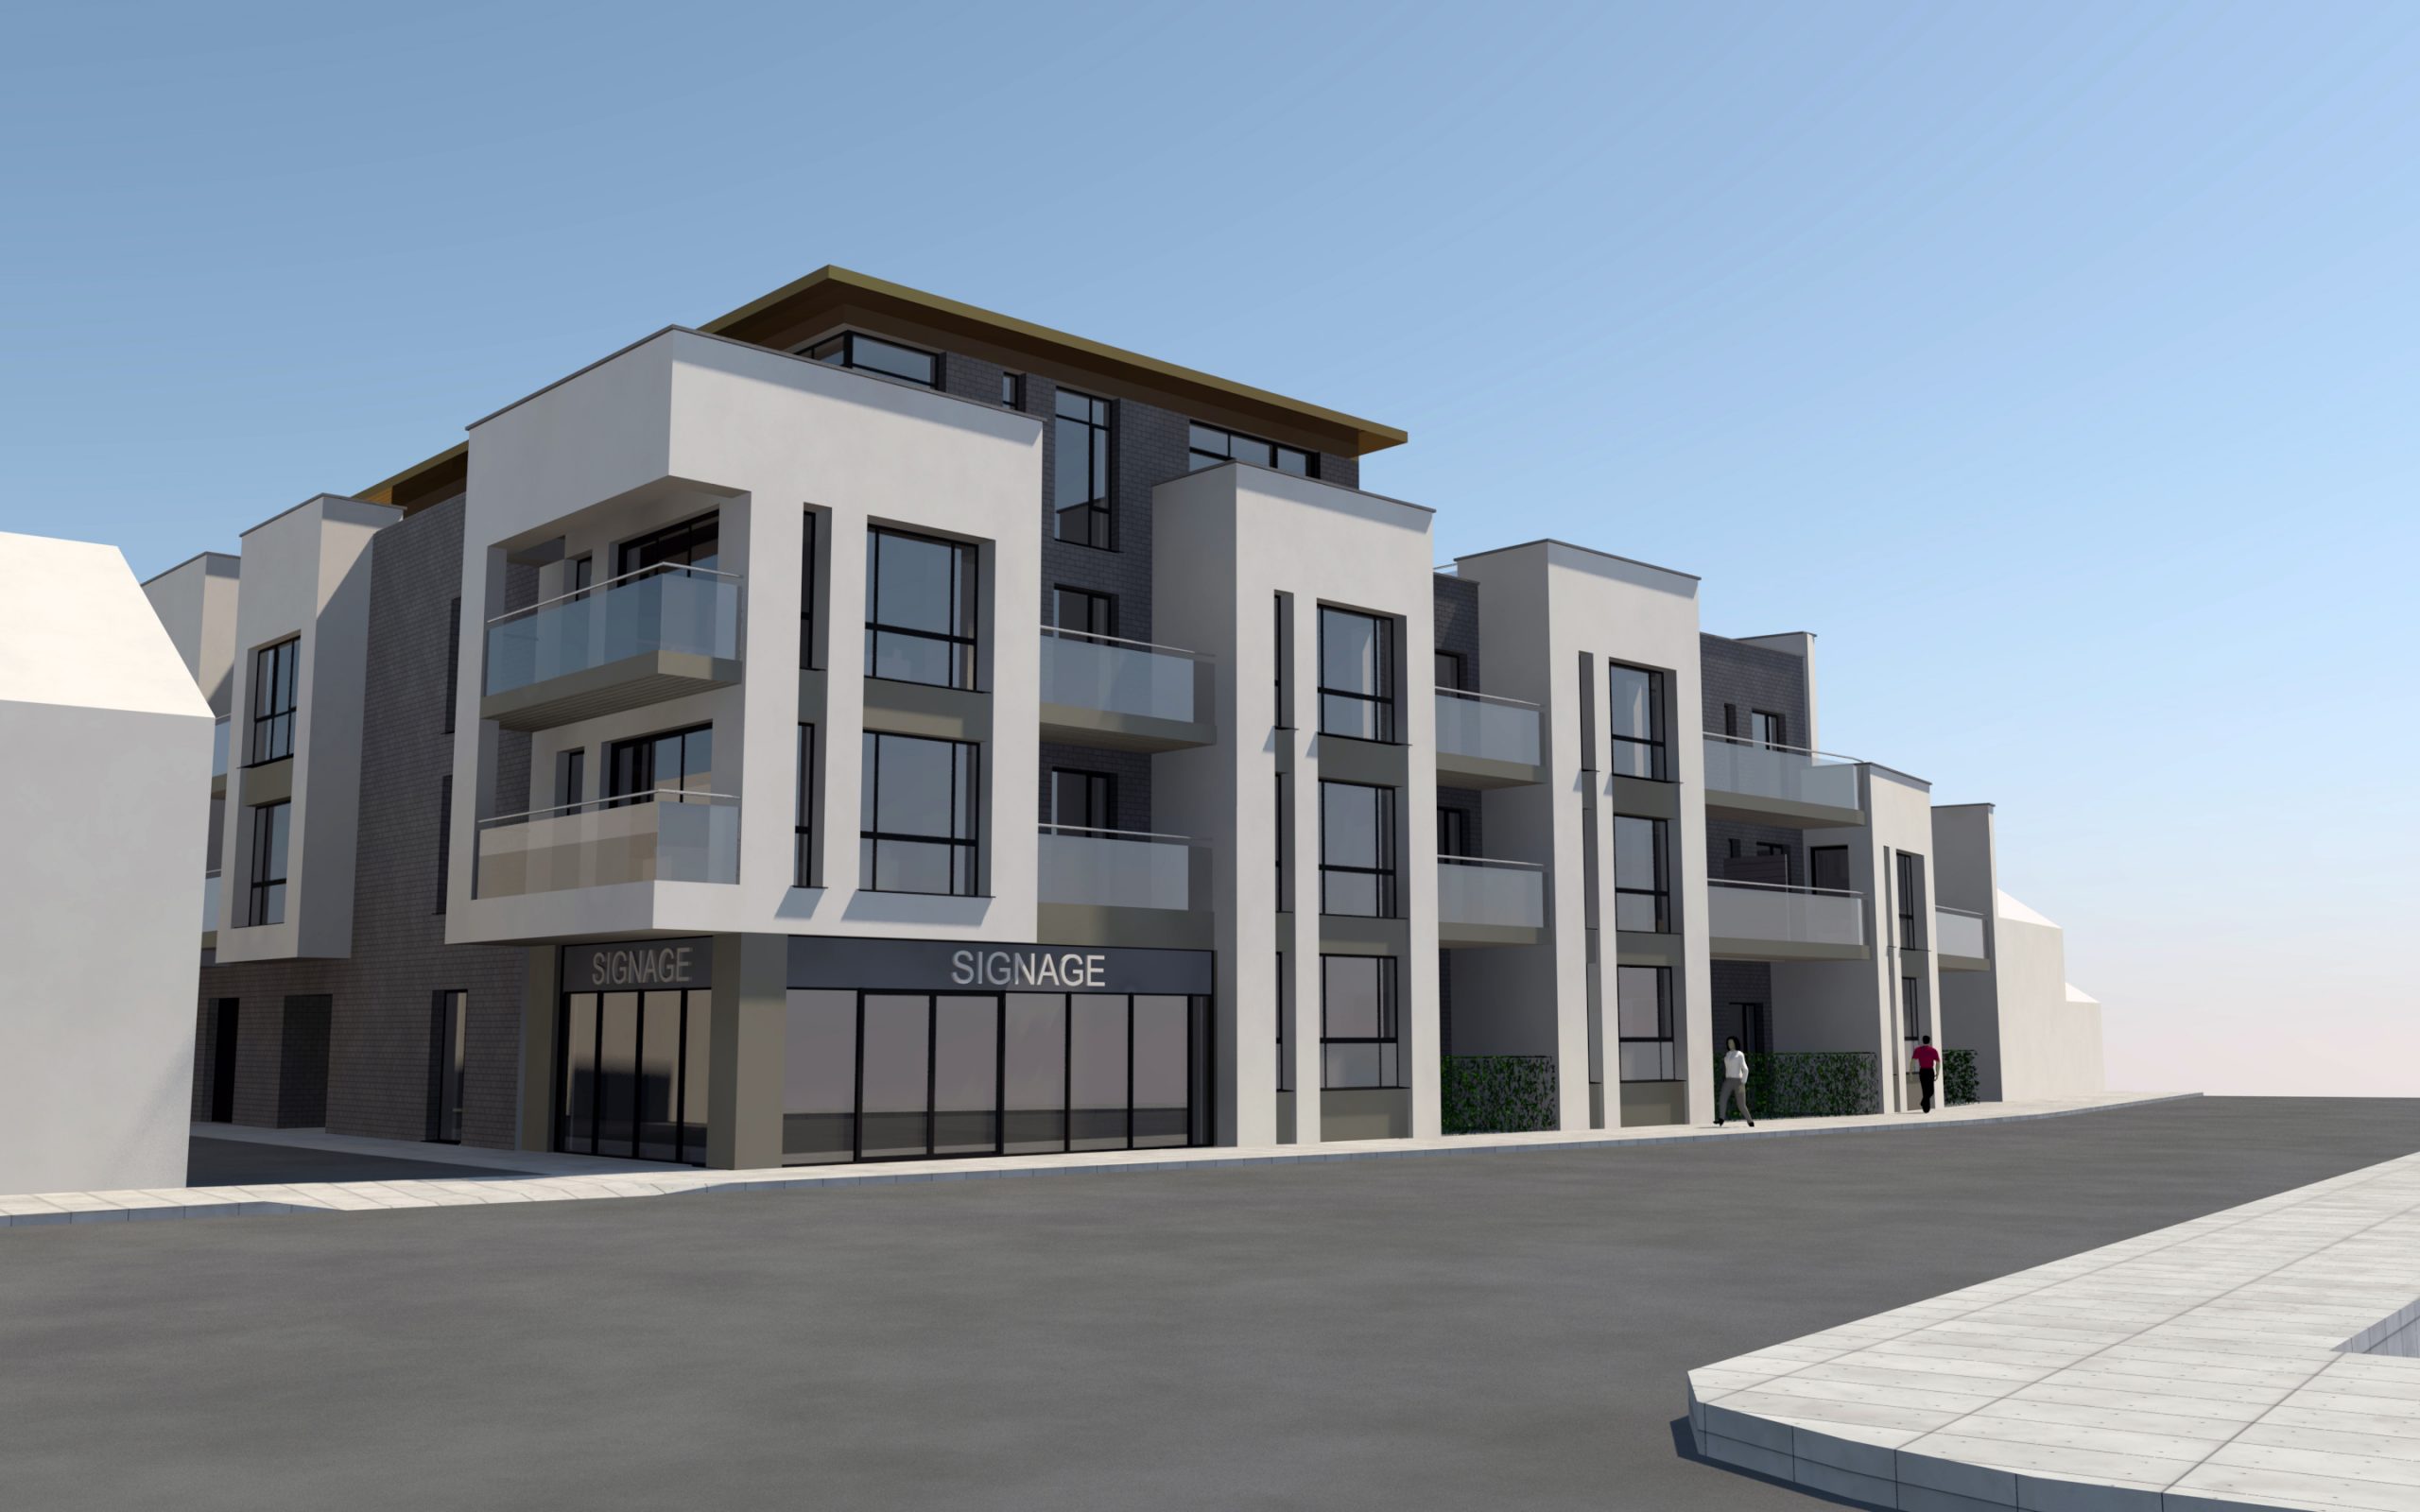 Planning granted for mixed-use development in Dundalk. Architecture Ireland, Urban Design, Dublin/Cork/Kerry Architecture